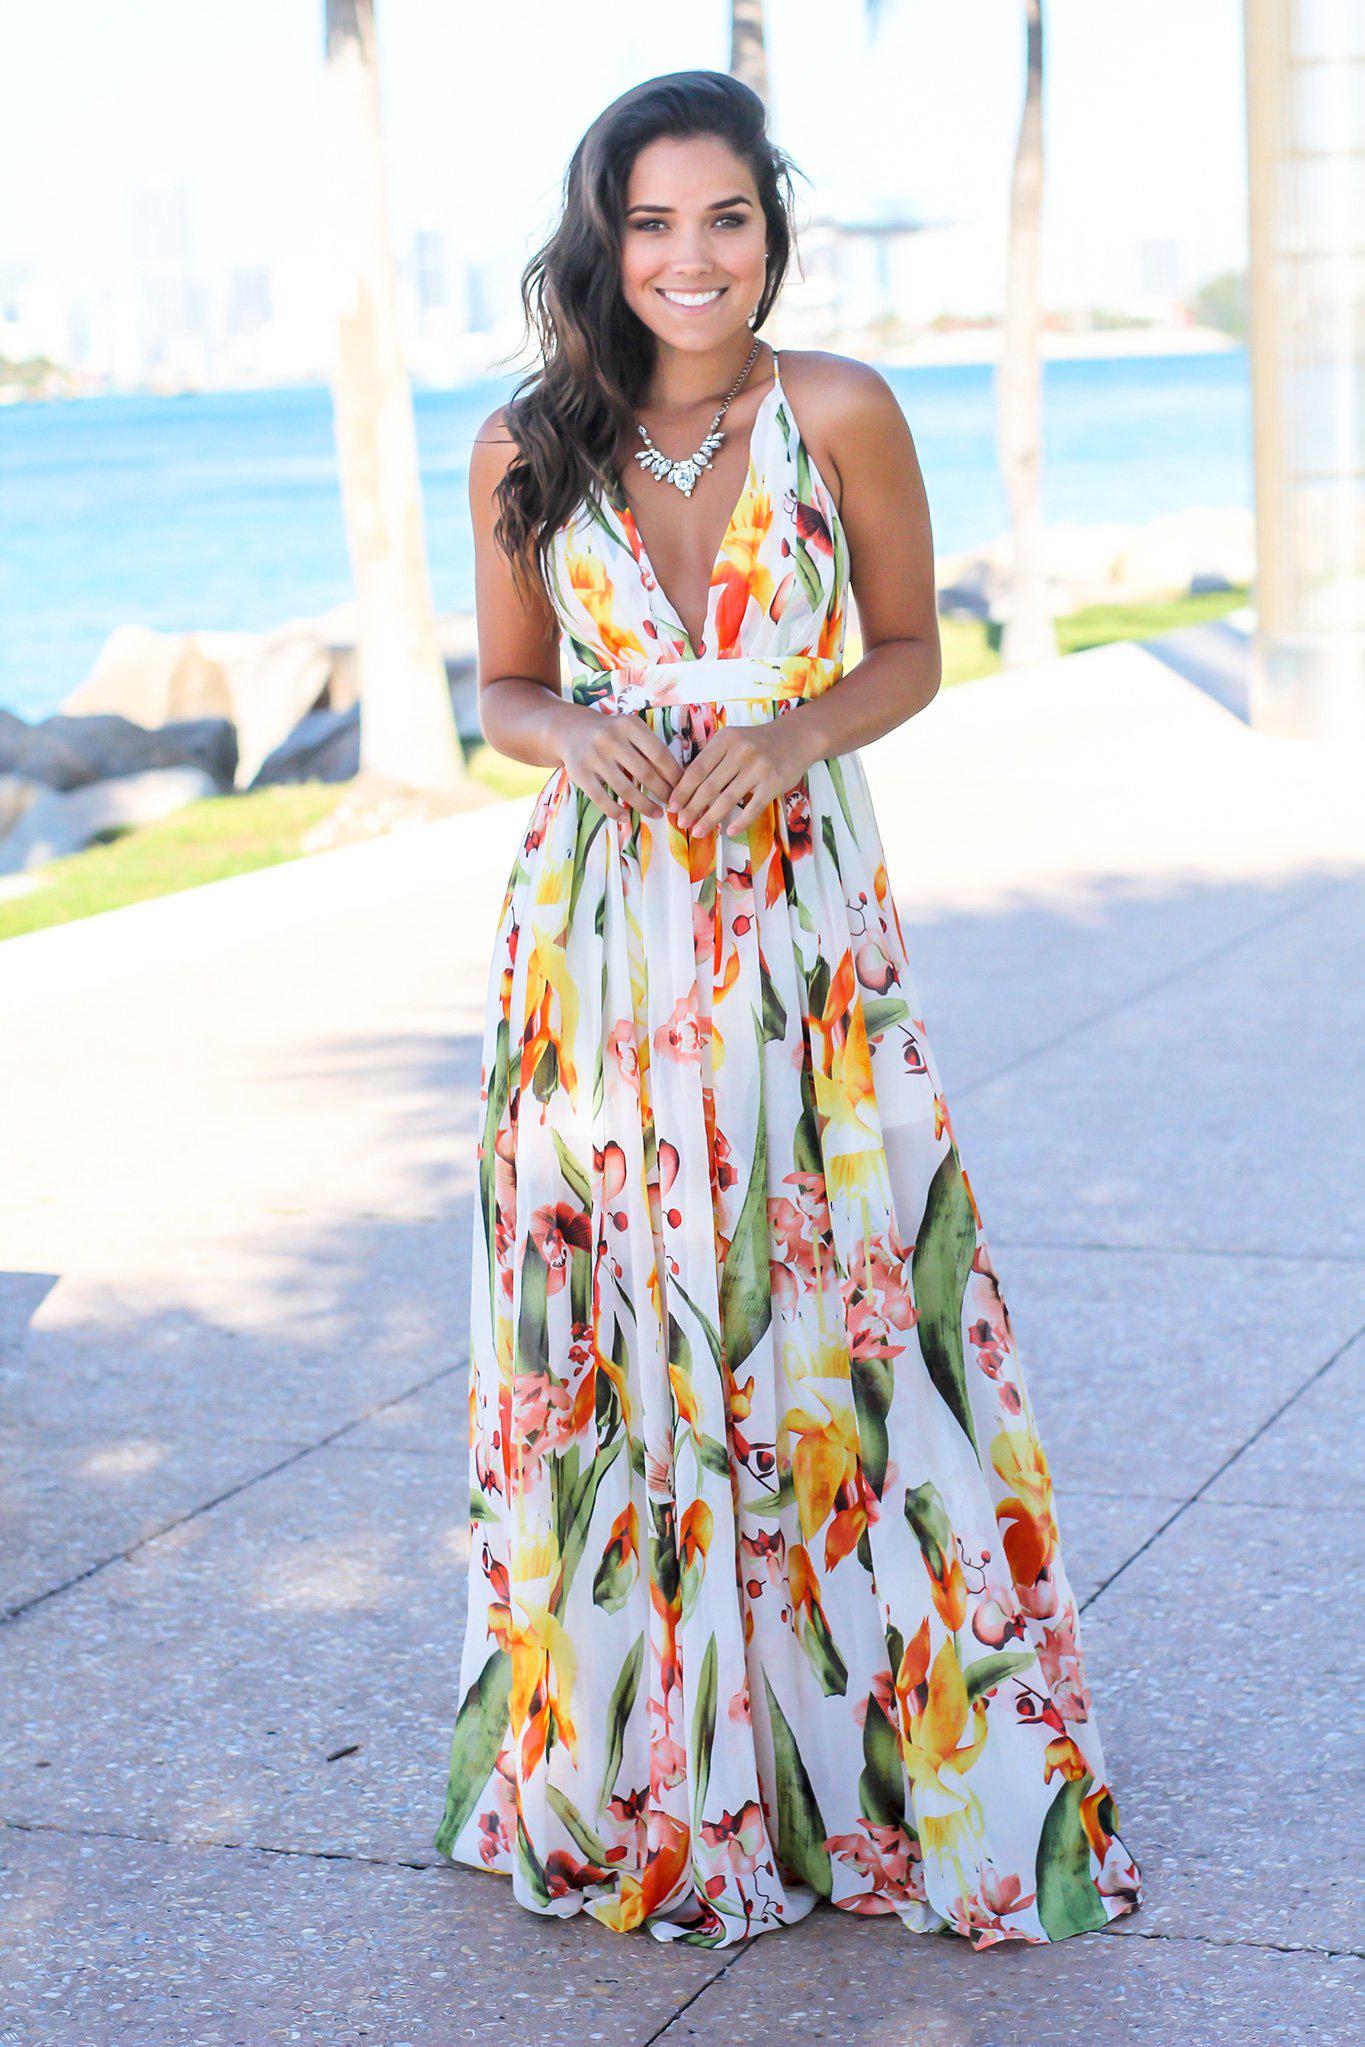 white and orange floral dress